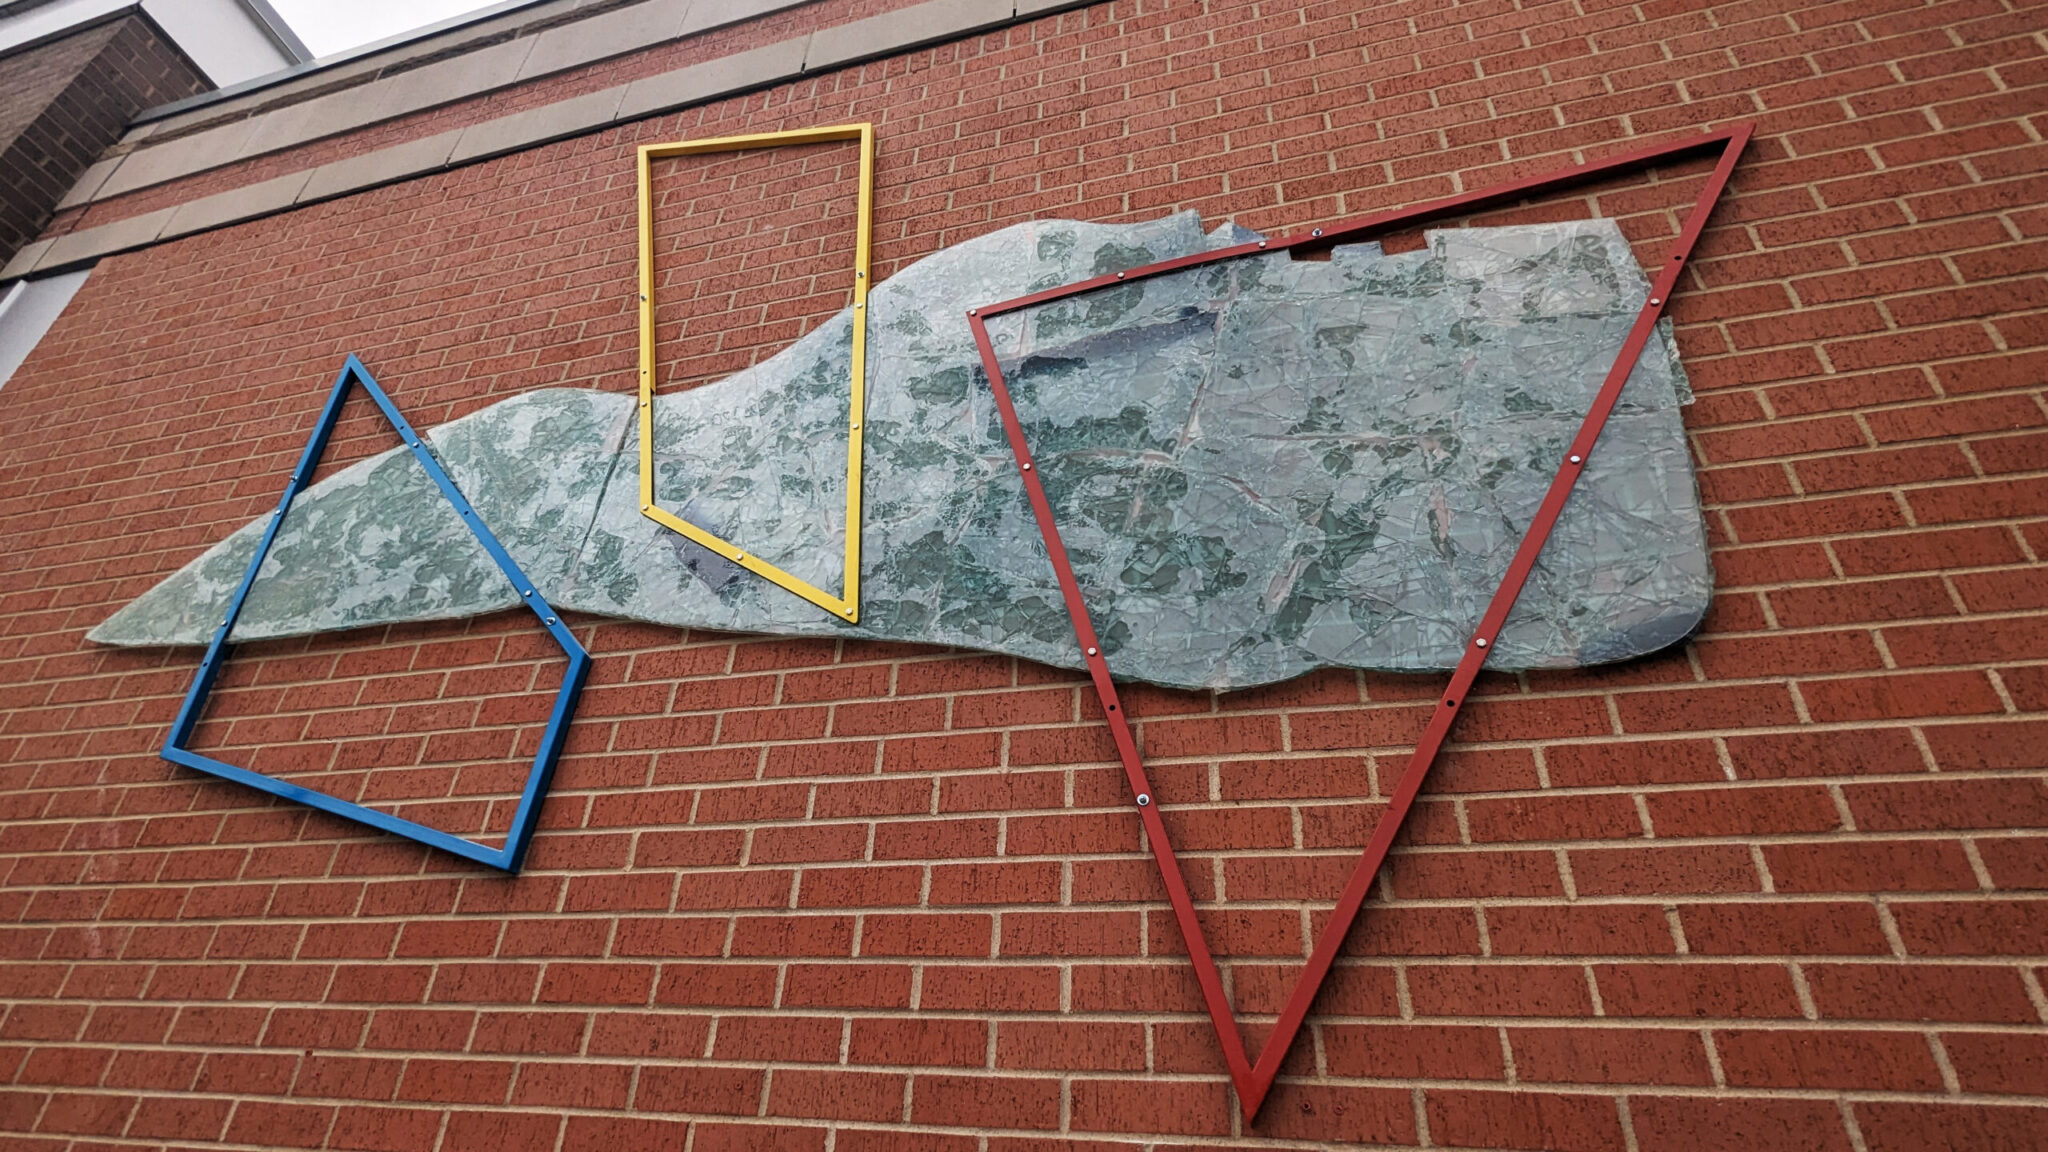 Three metal geometric outlines in blue, yellow and red are bolted against a piece of shattered glass that looks like a map. The shapes represent the redlining of city space. The piece is affixed to a brick wall as part of a series of installations at Chestnut Hill Square.